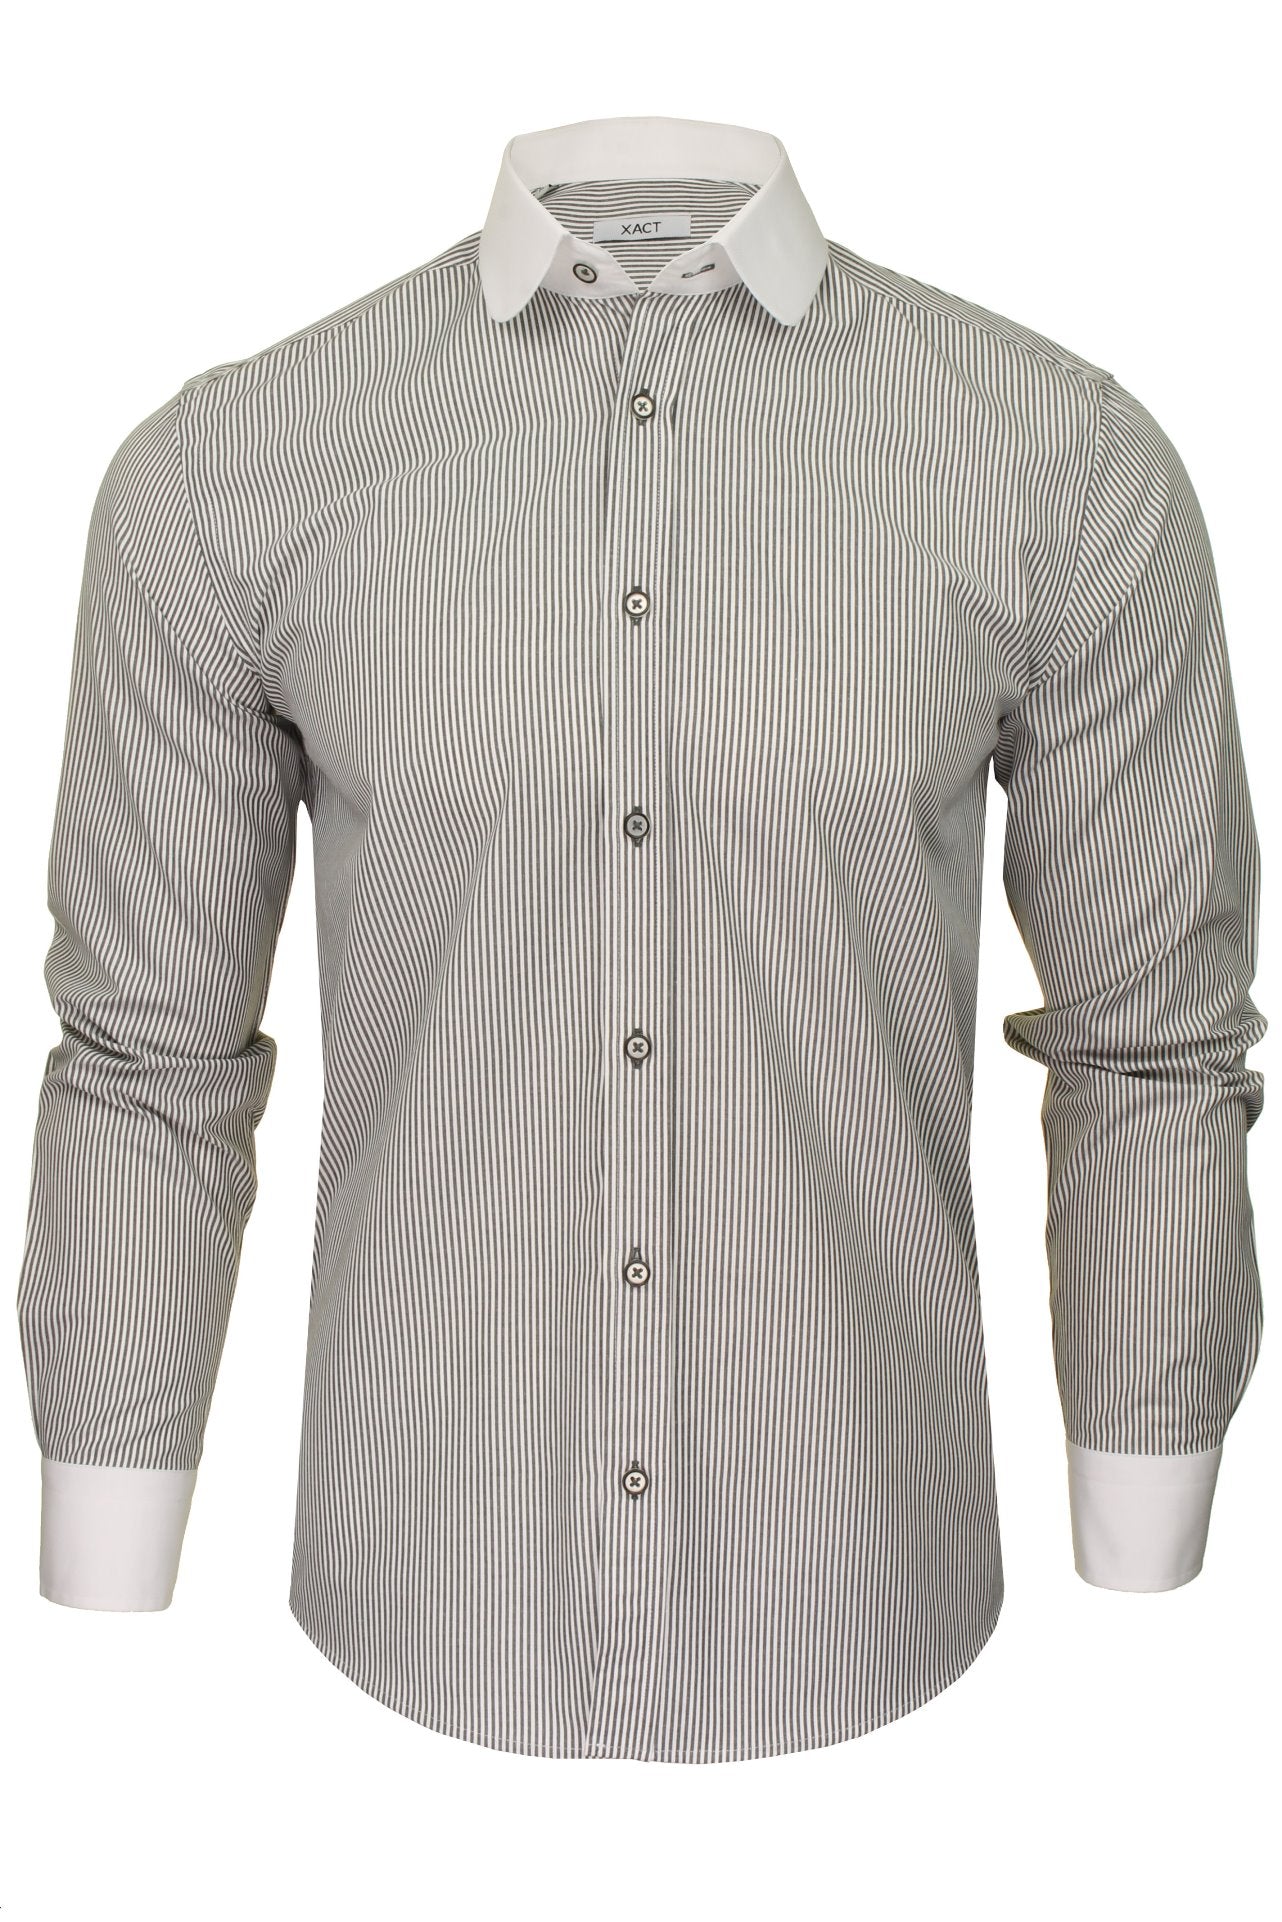 Xact Men's Long-Sleeved Striped Shirt with White Penny/Club Collar and White Cuffs-Main Image